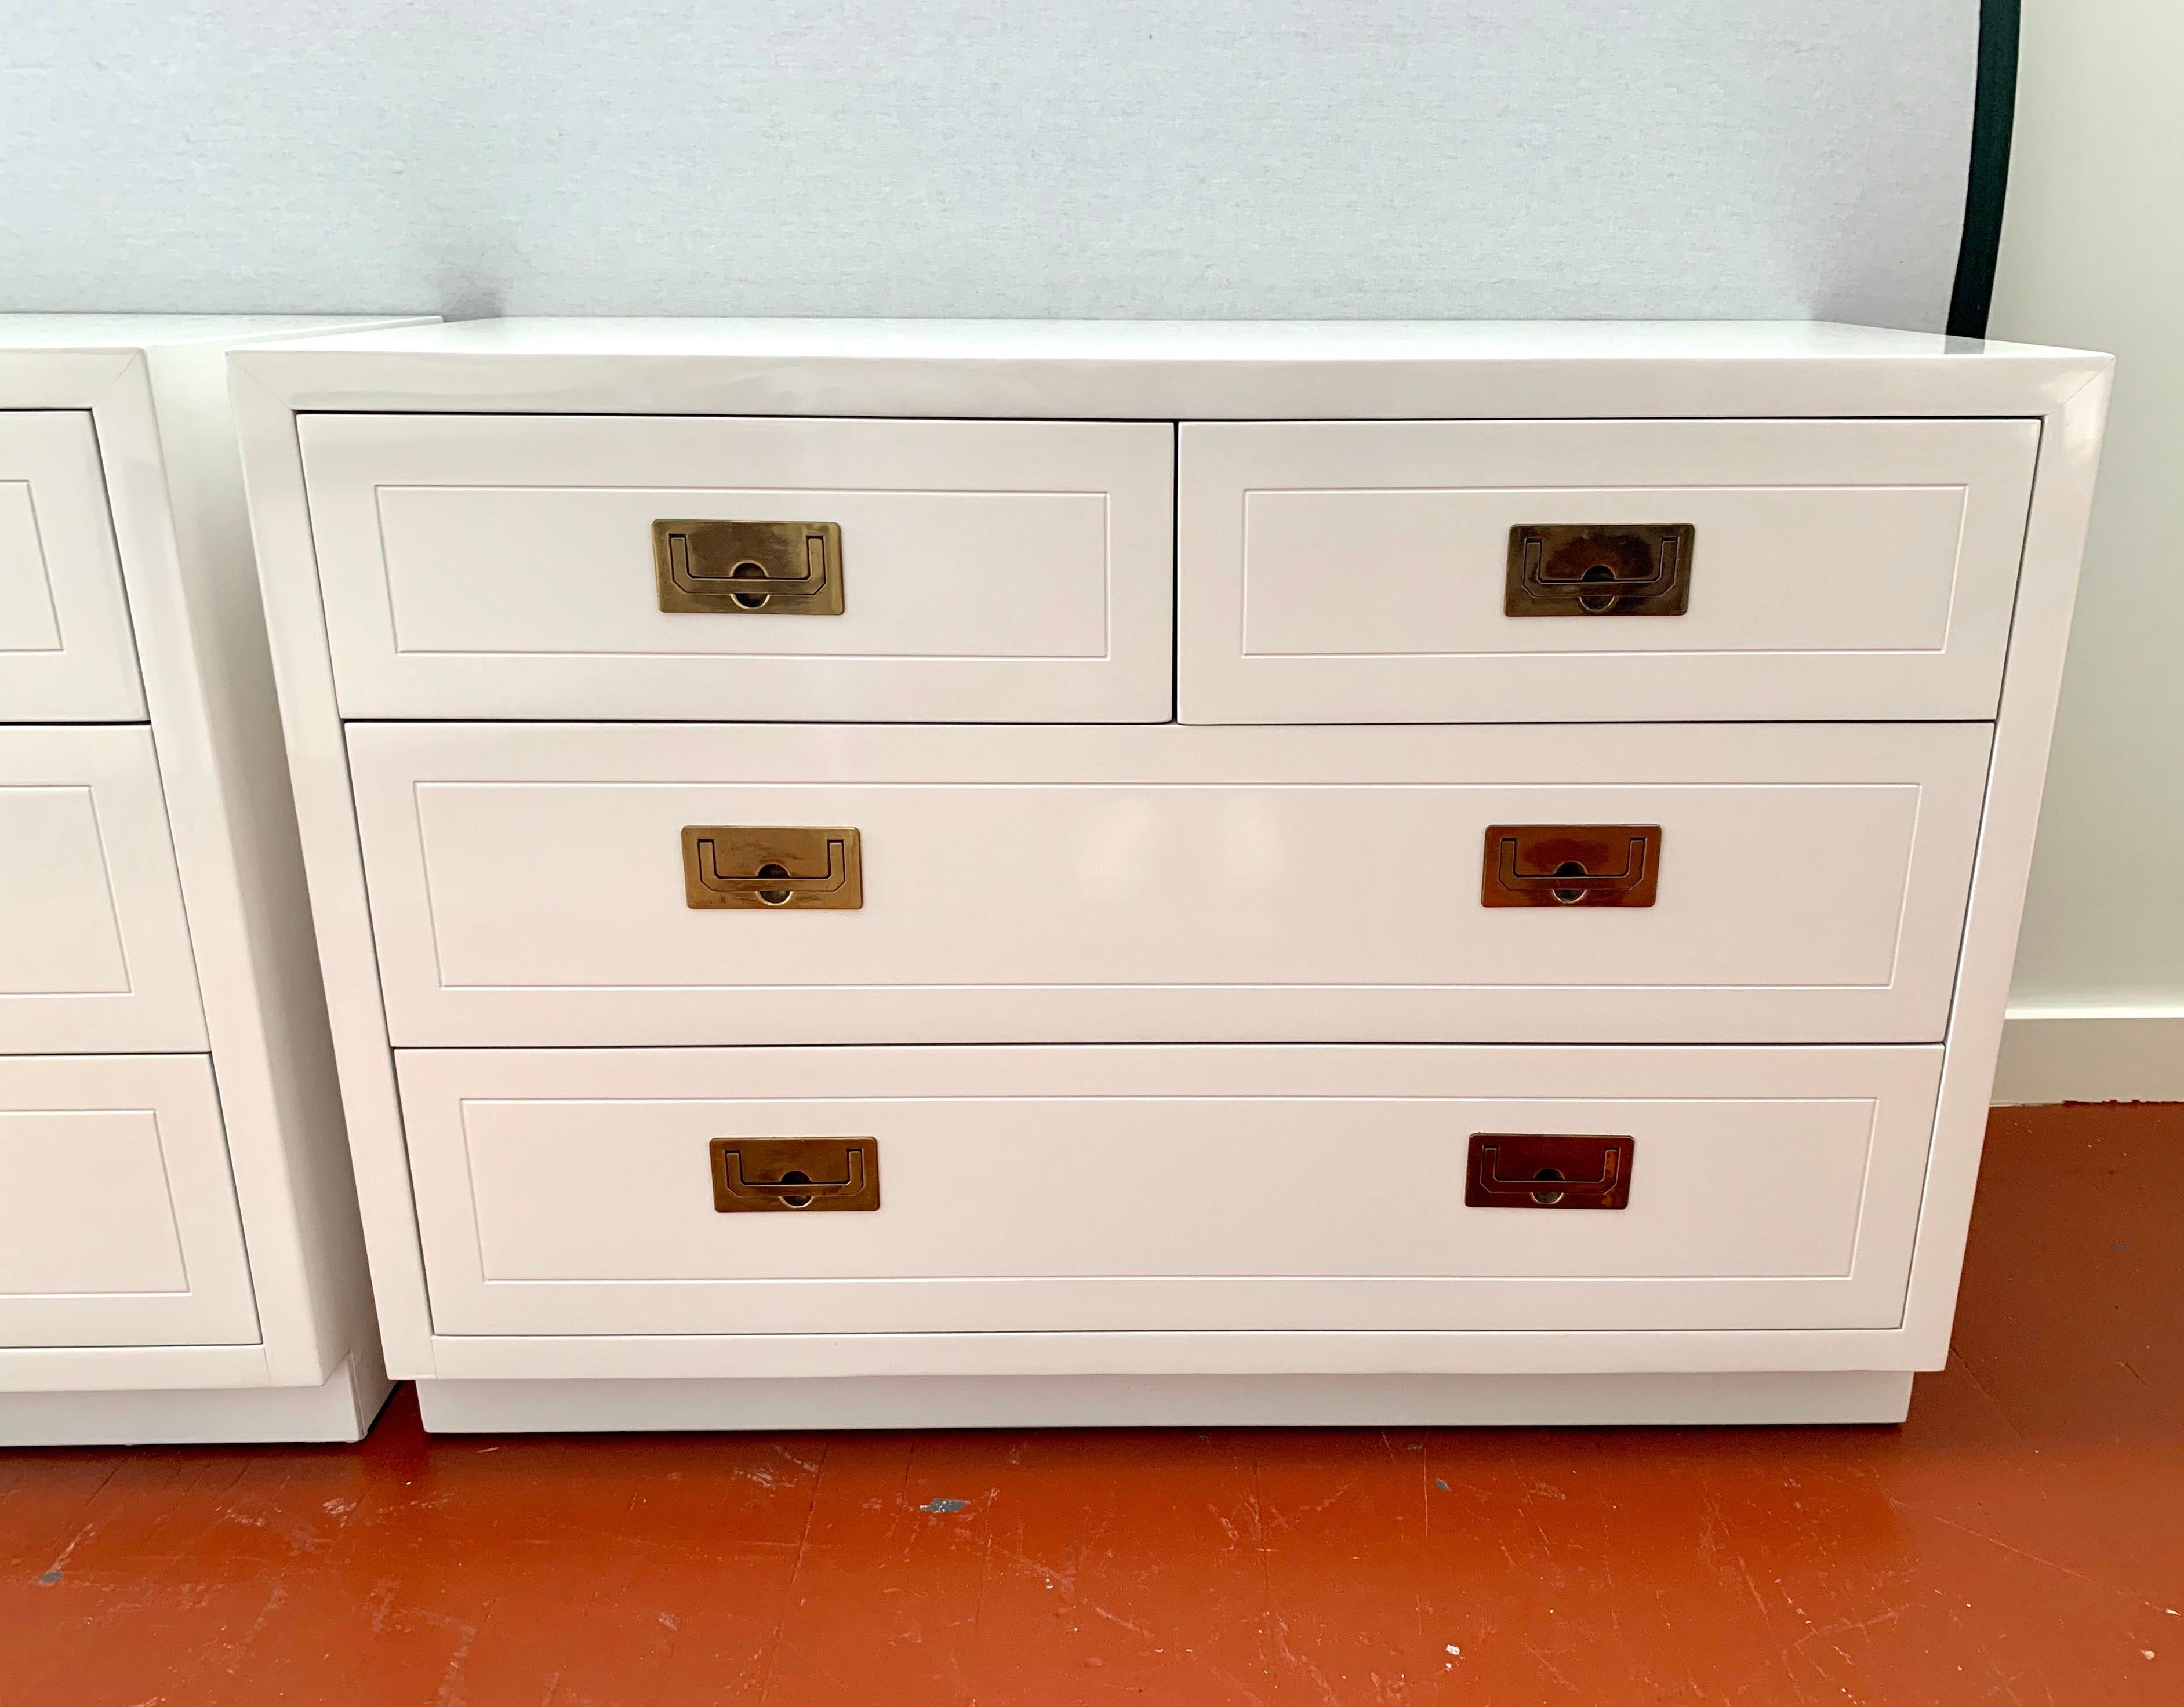 Midcentury campaign chest of drawers newly lacquered in white, feature four dovetailed drawers with original recessed brass hardware. Marked “Henredon” inside drawer.